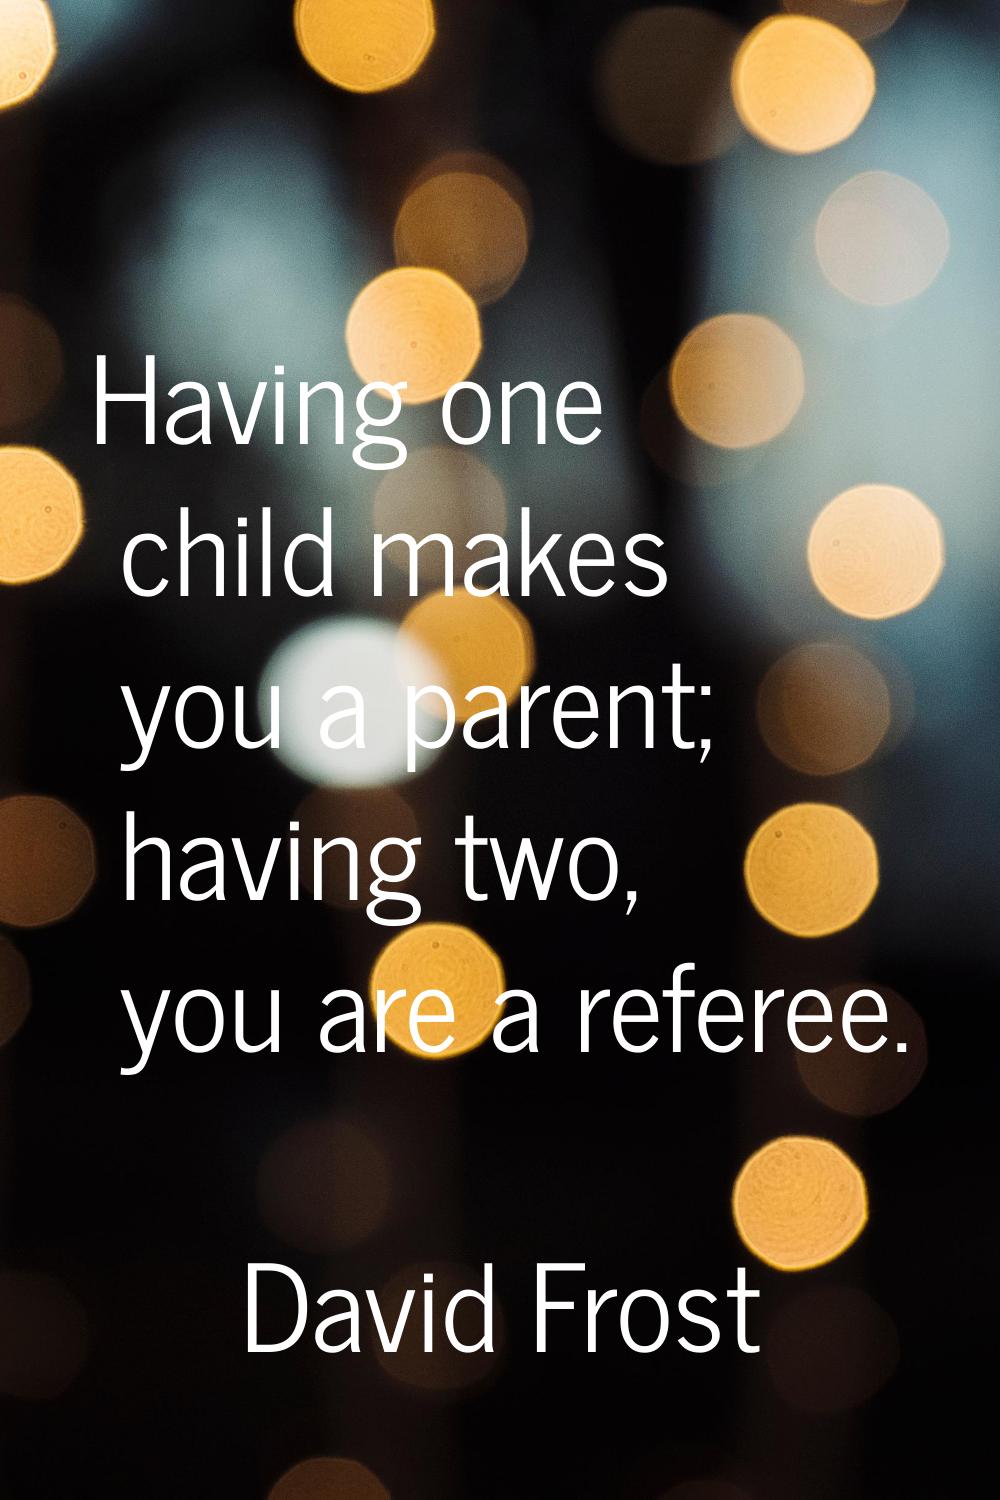 Having one child makes you a parent; having two, you are a referee.